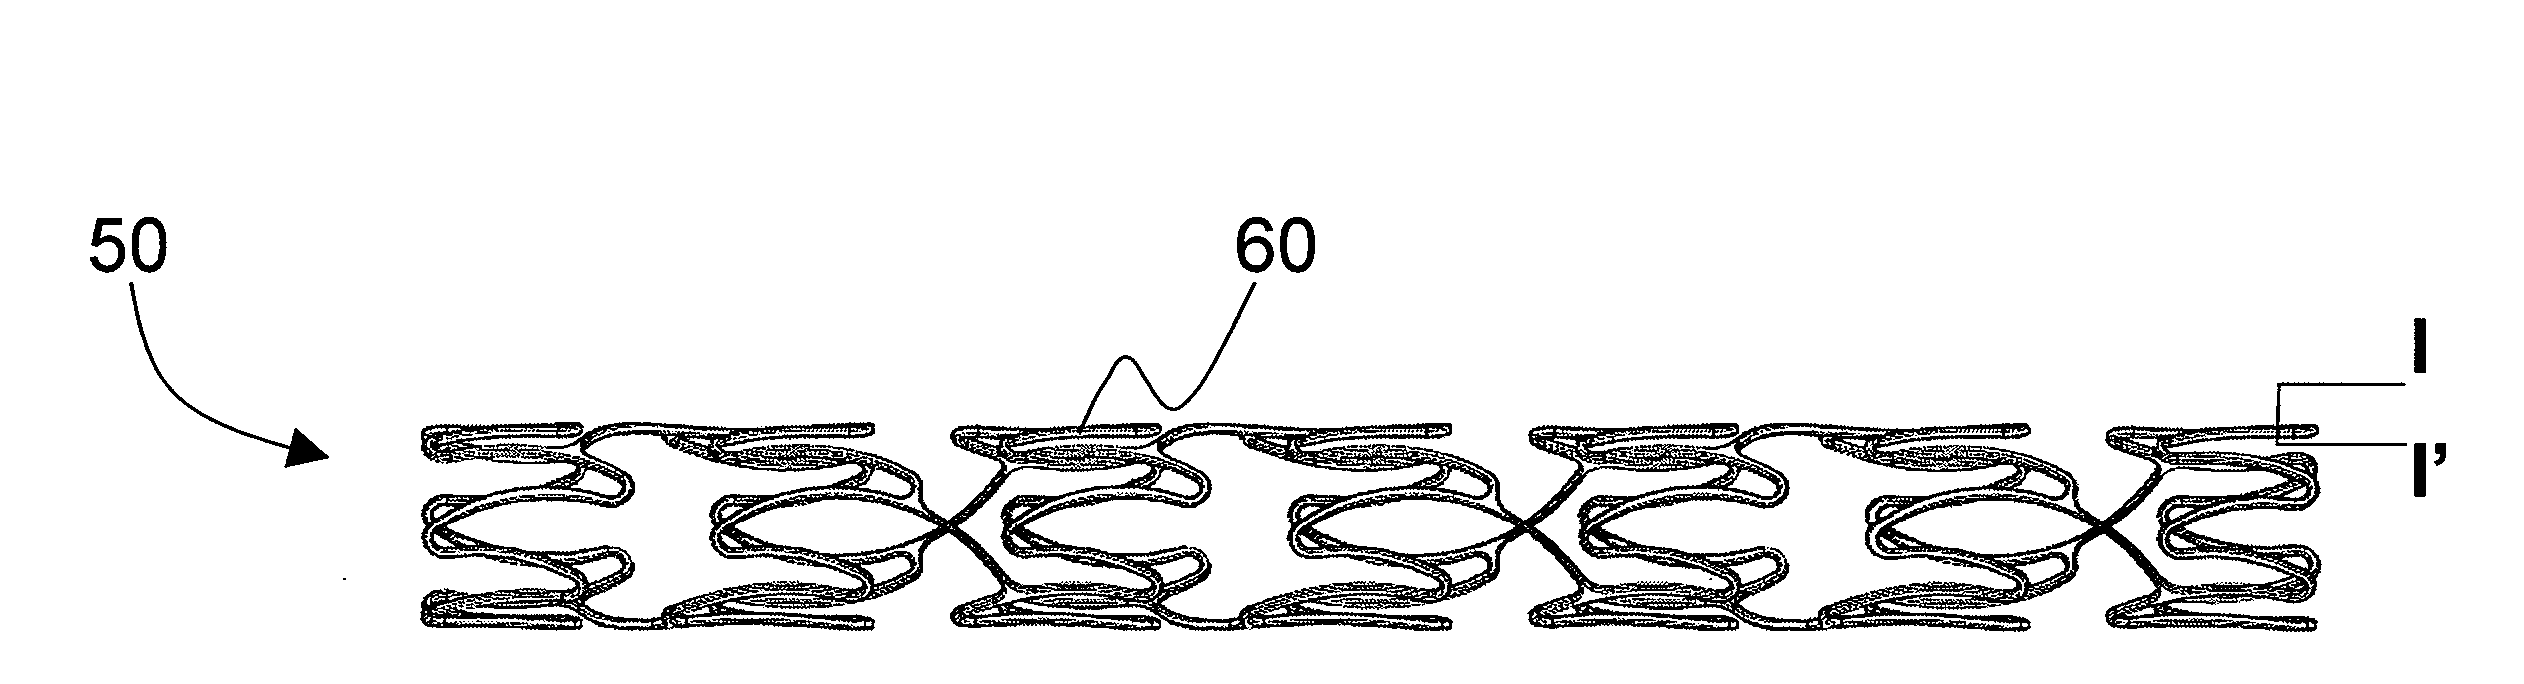 Implantable devices having textured surfaces and methods of forming the same